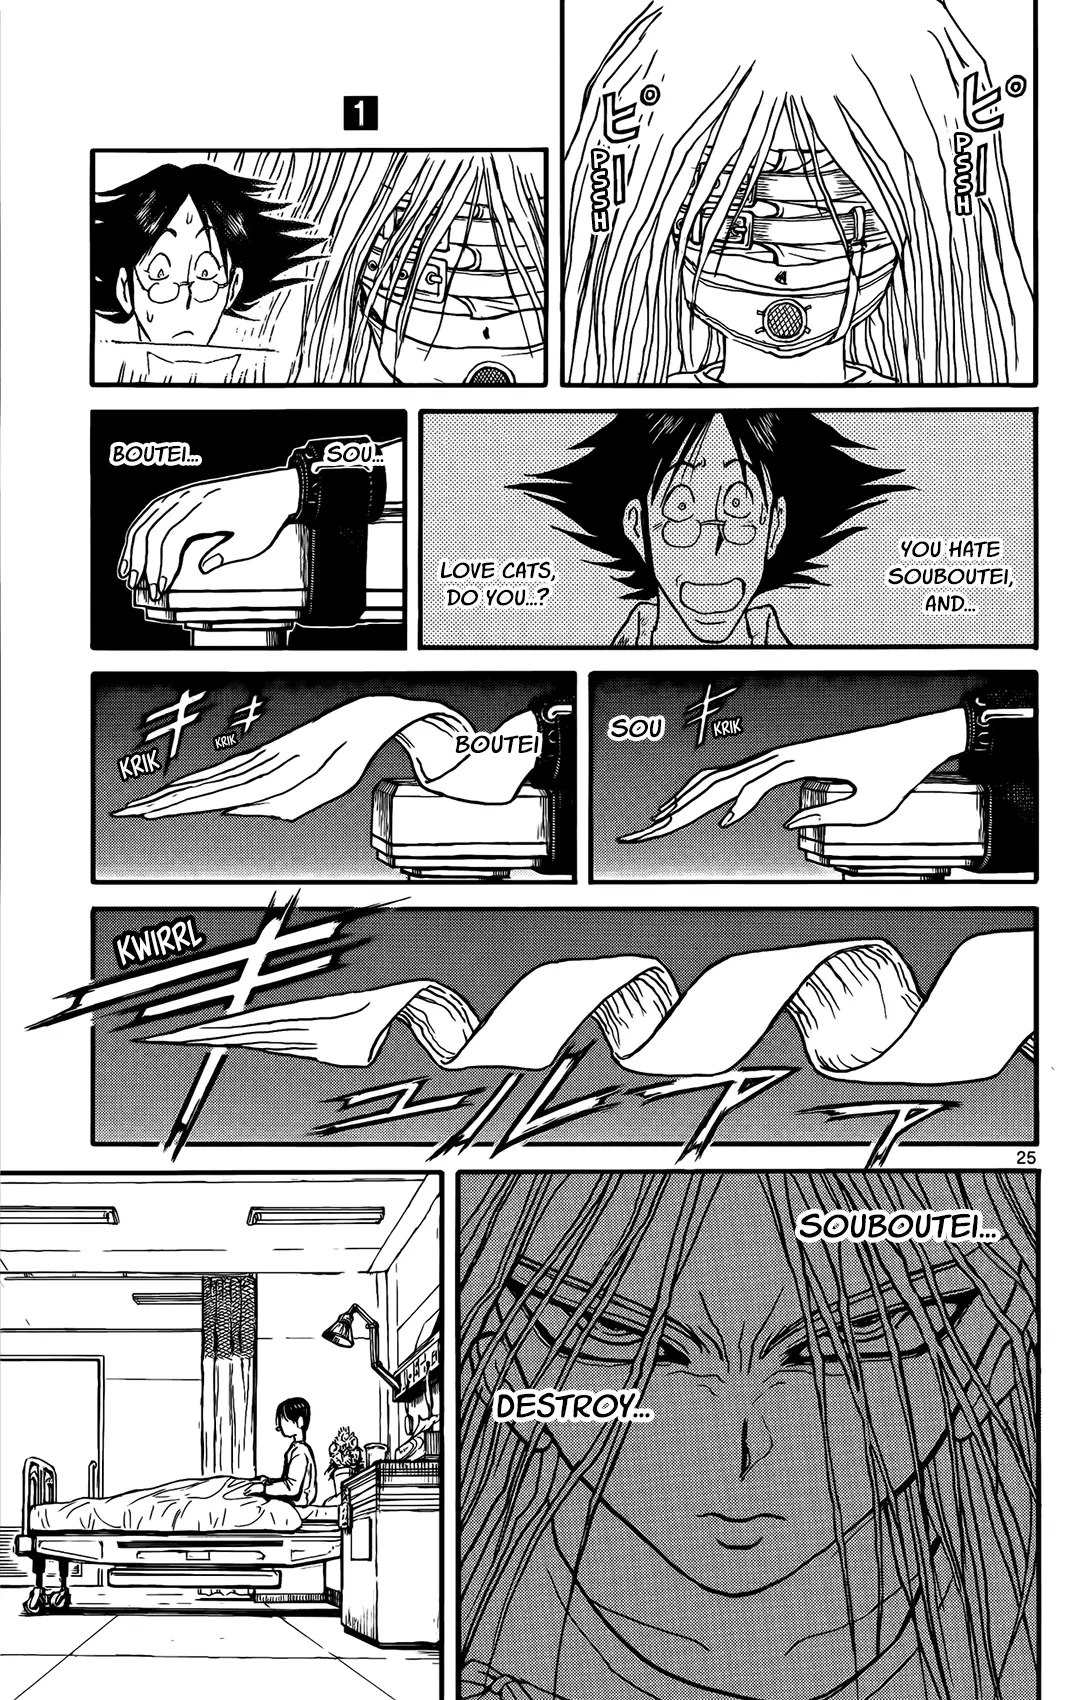 Souboutei Must Be Destroyed - 2 page 25